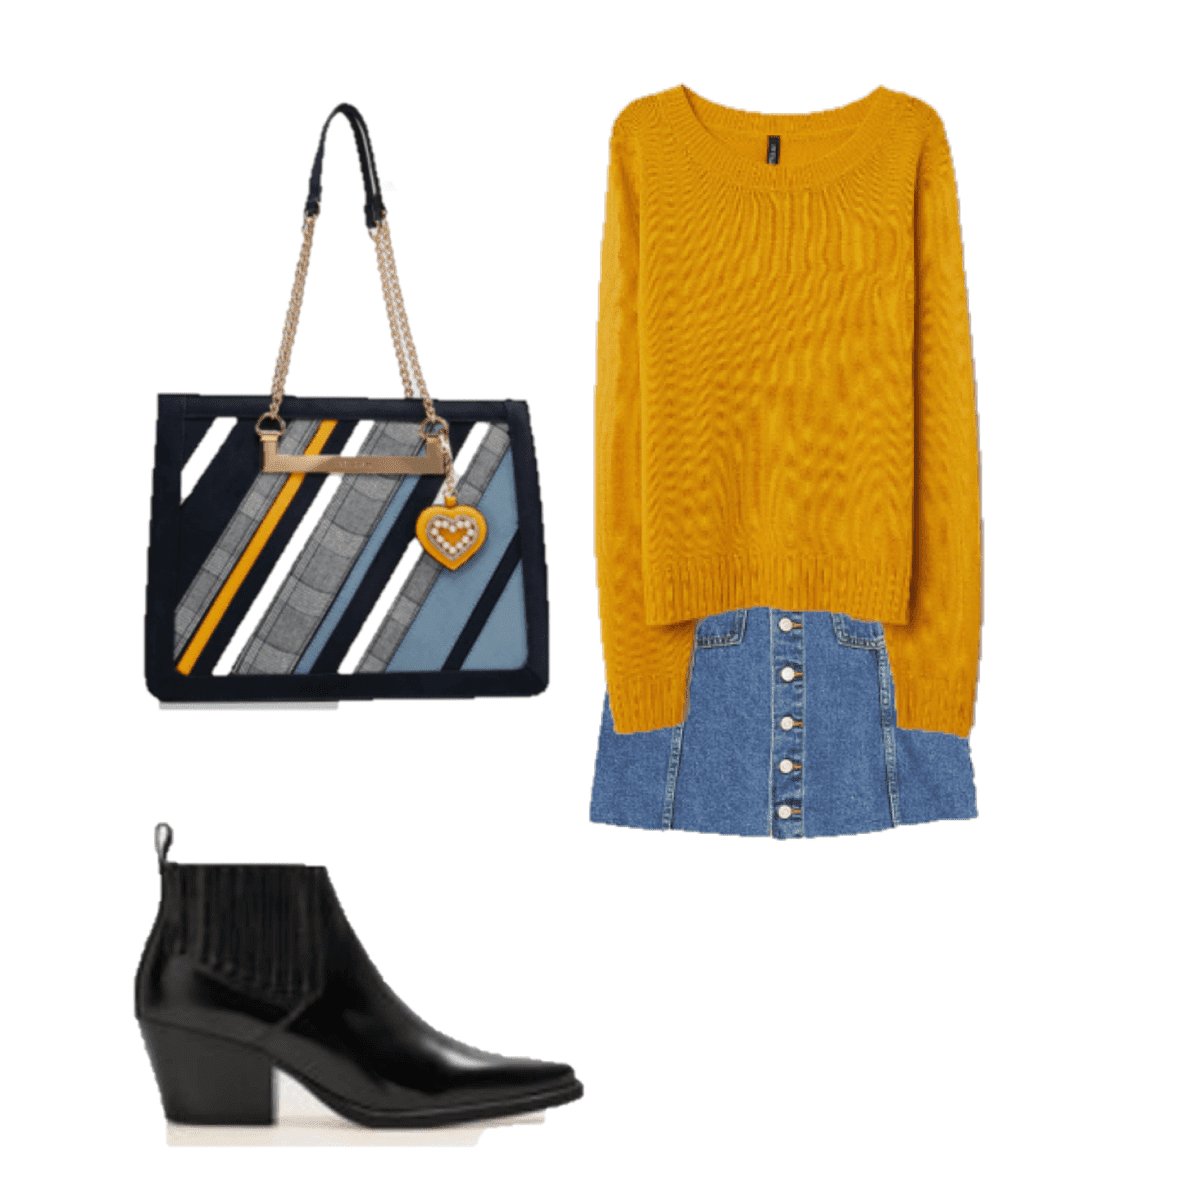 Outfit of The Day: A Mustard Sweater for Autumn Days